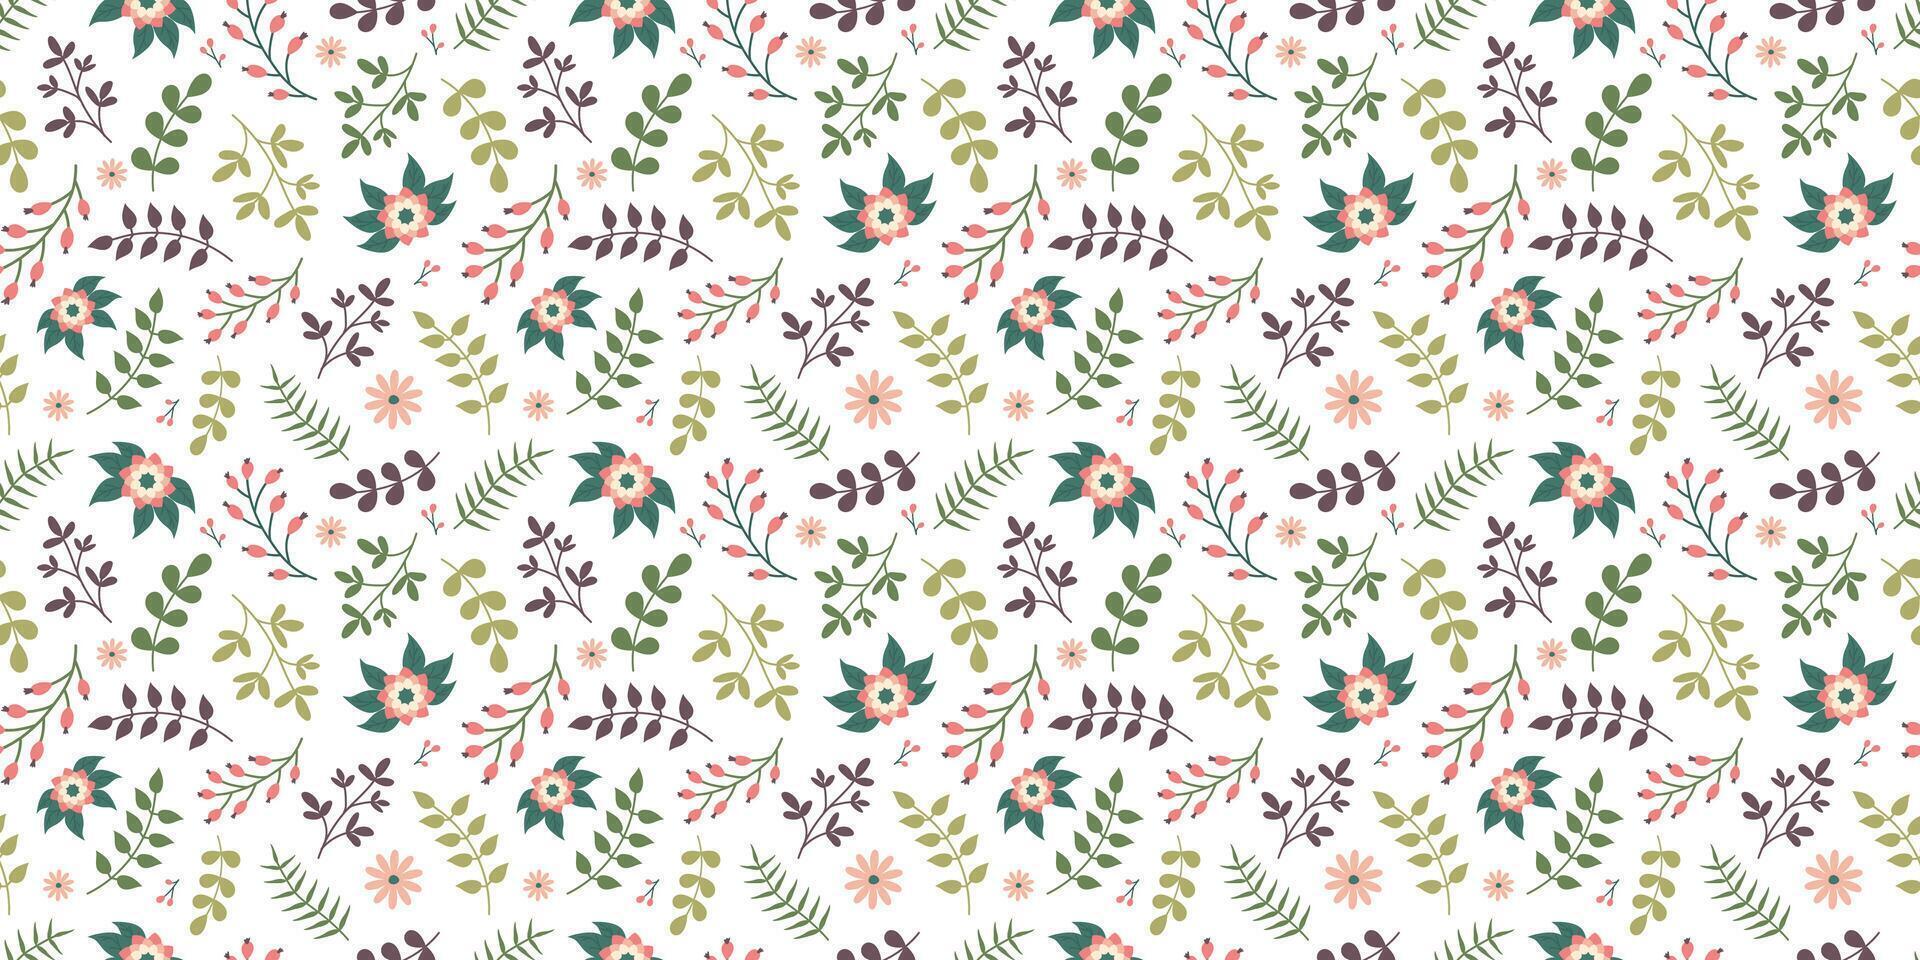 Flower and Leaves Spring elegant seamless Pattern on white background. Floral repeating design for print. Flat summer vector texture. Botanical minimalistic Nature background for textile and wrapping